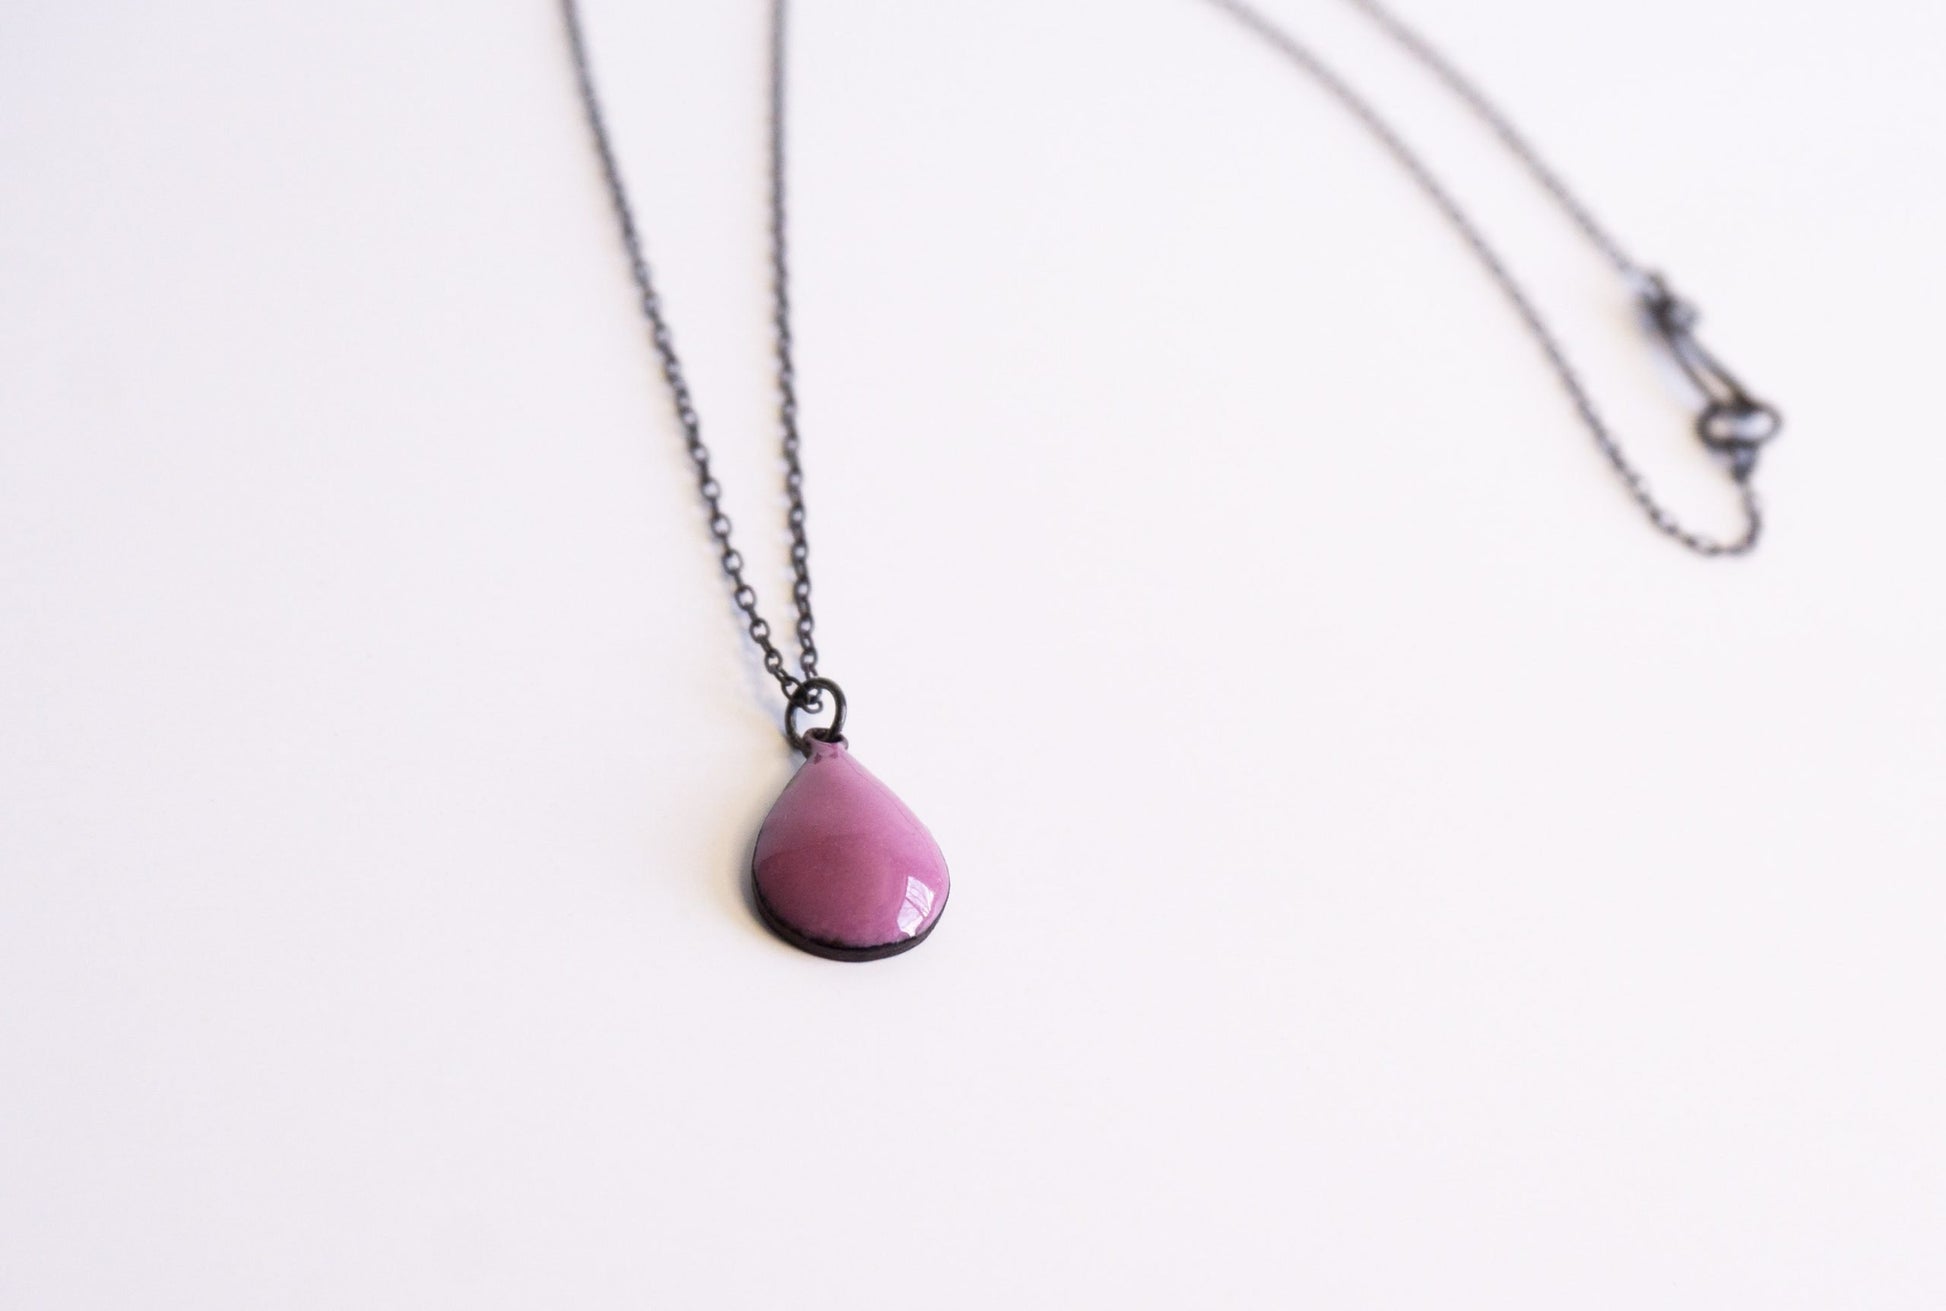 blackened silver chain with orchid raindrop